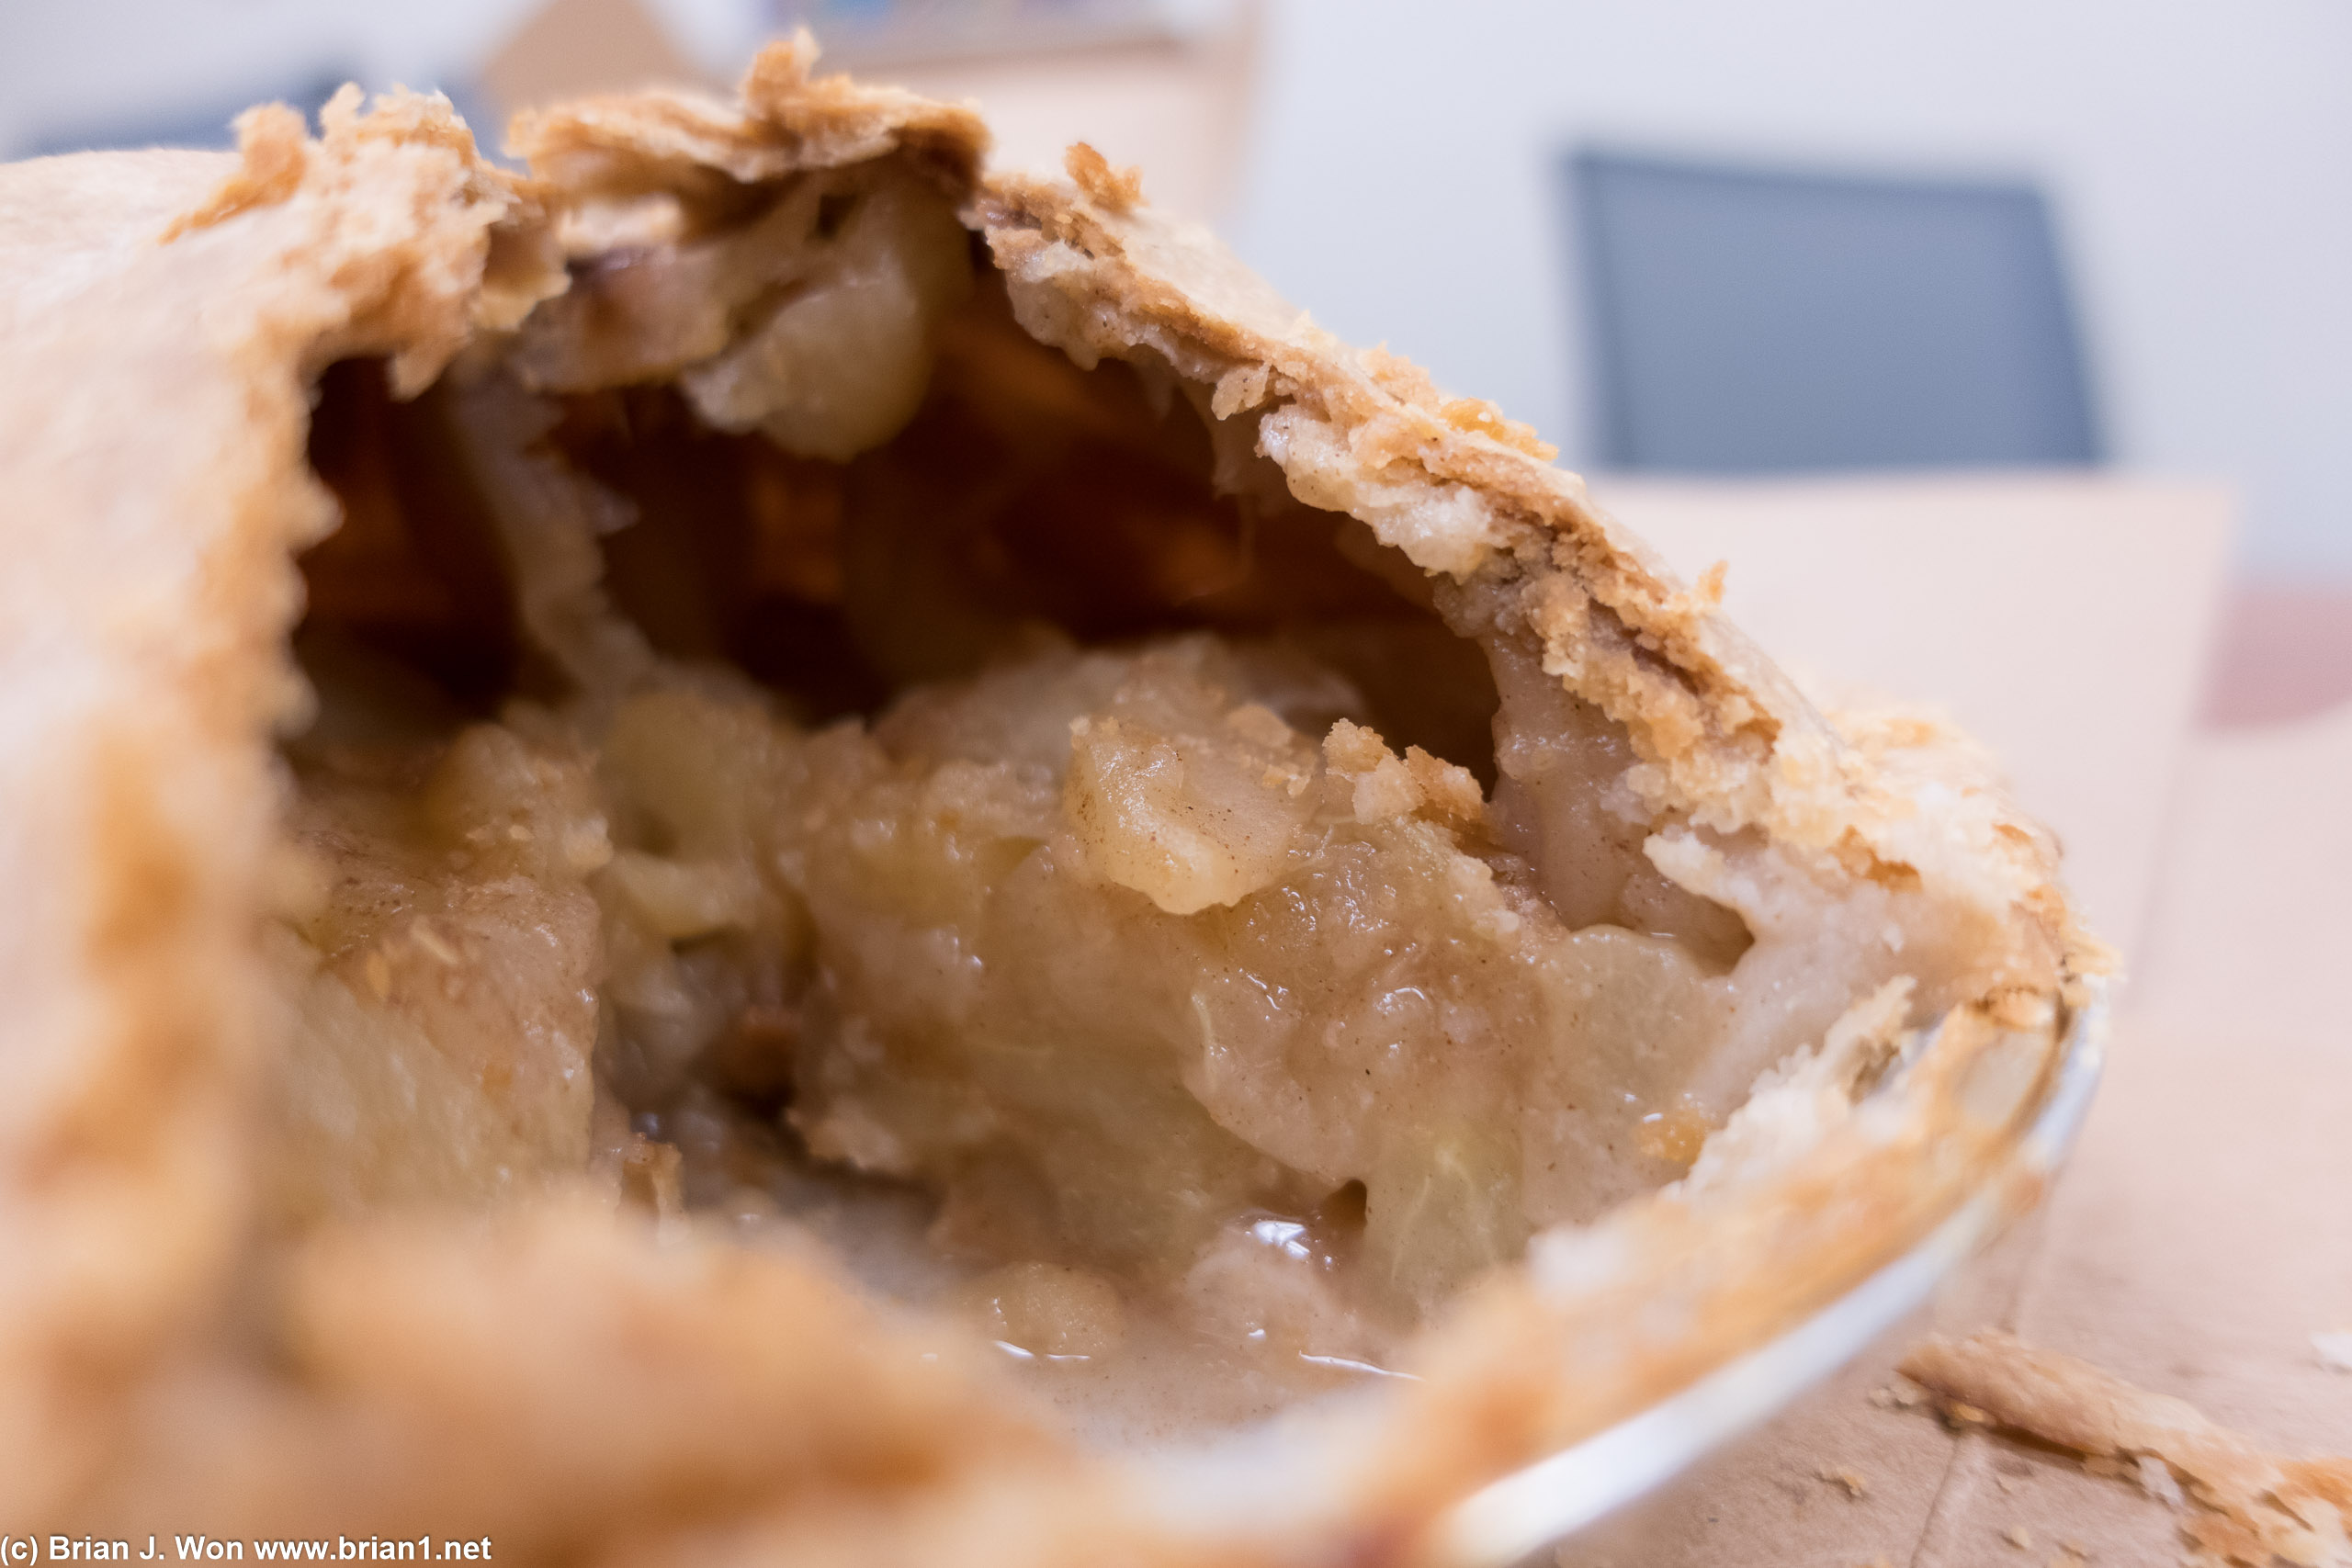 Cross-section of the apple pie.